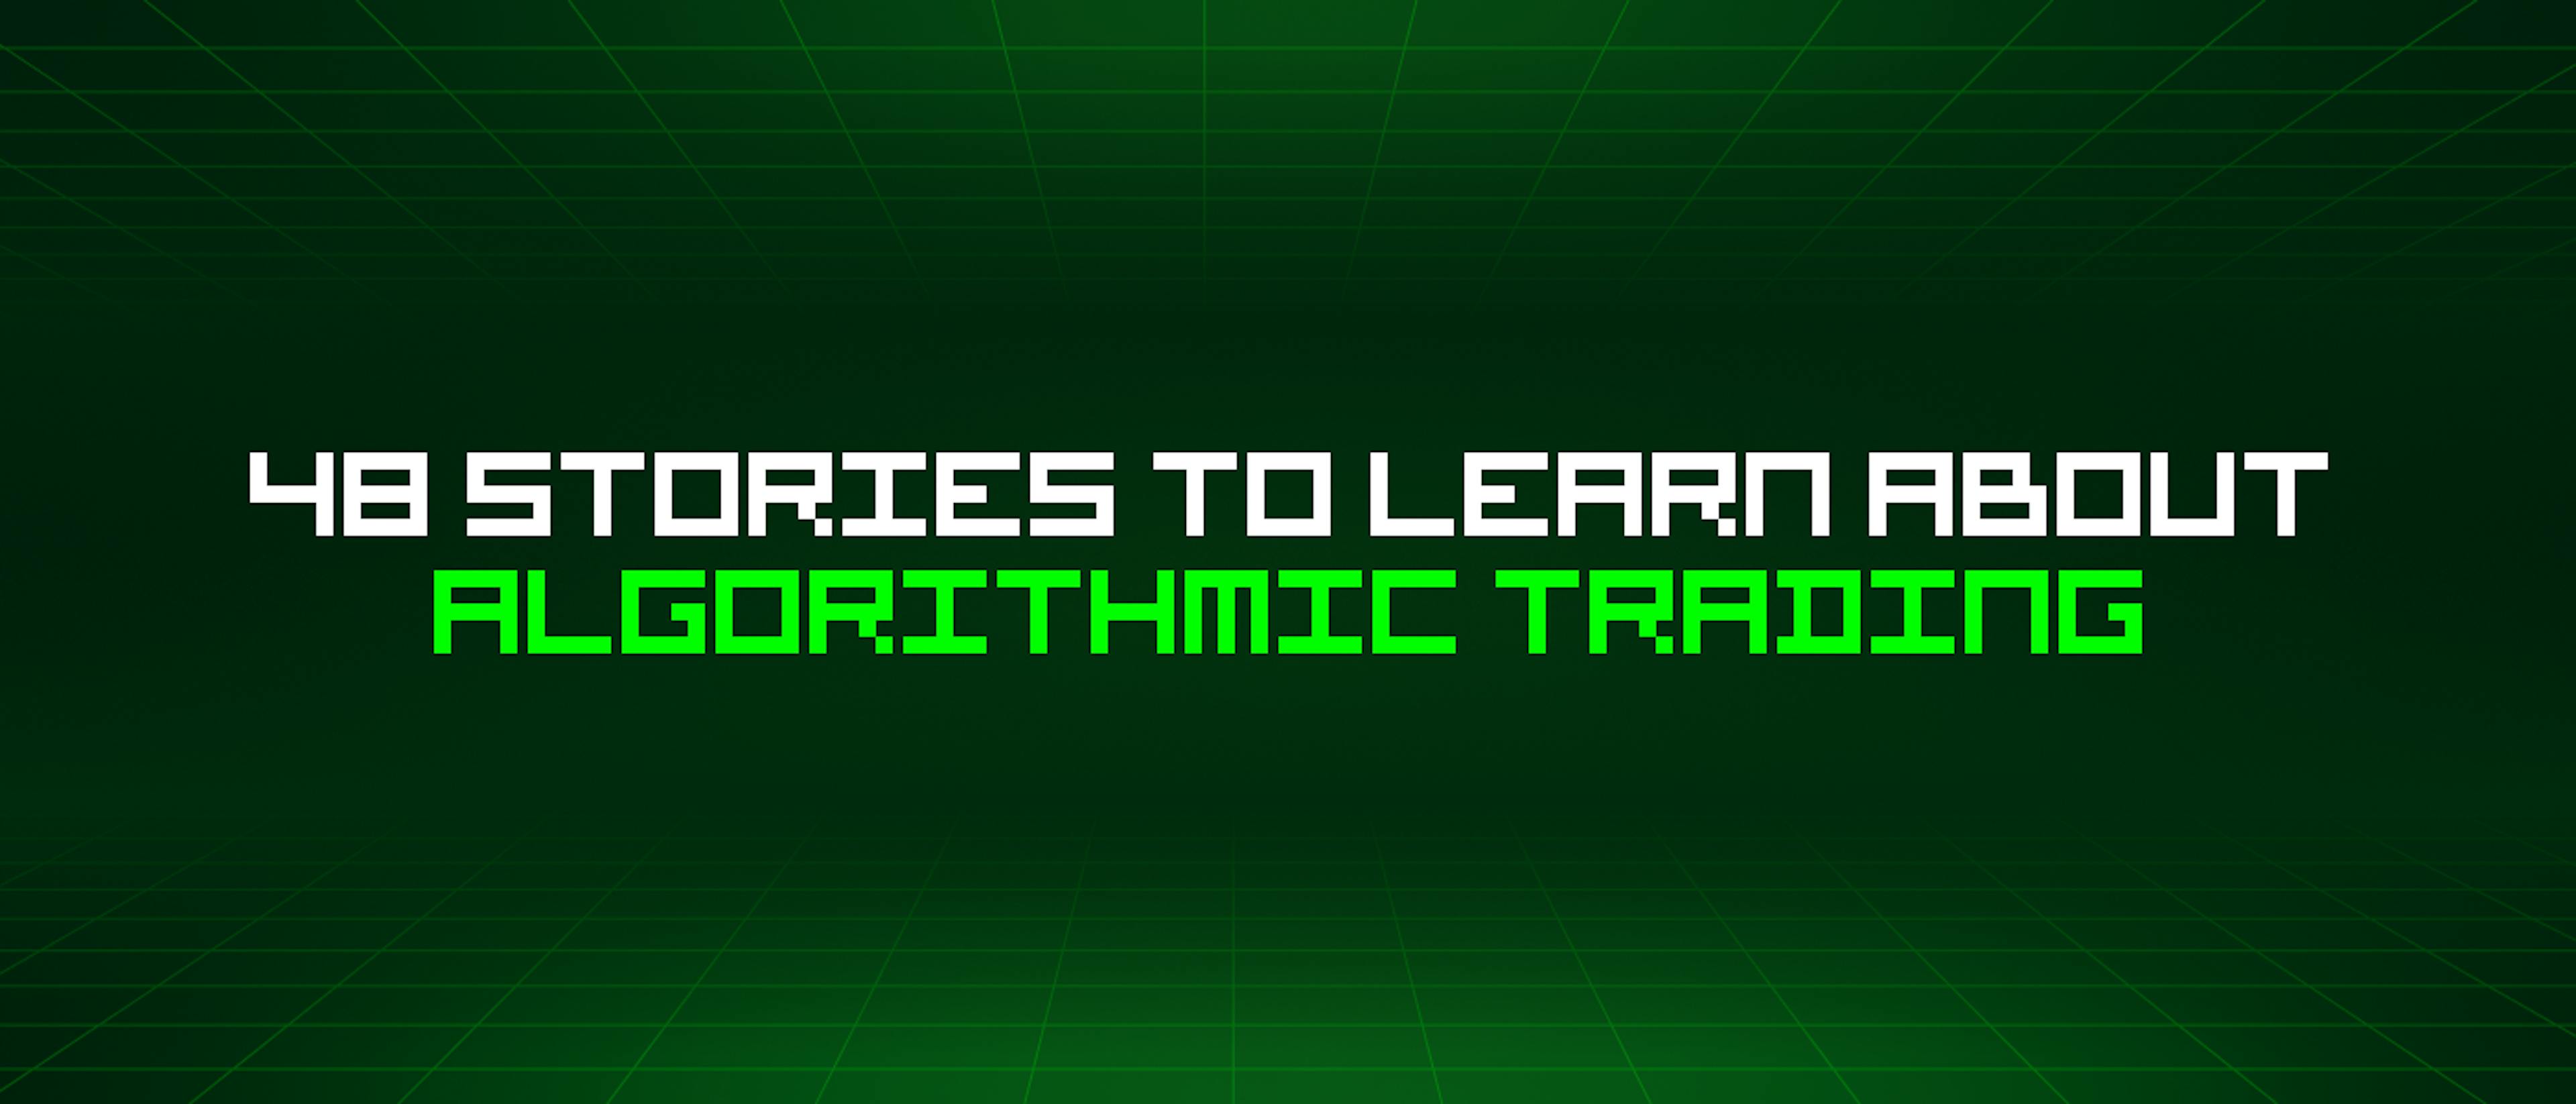 featured image - 48 Stories To Learn About Algorithmic Trading